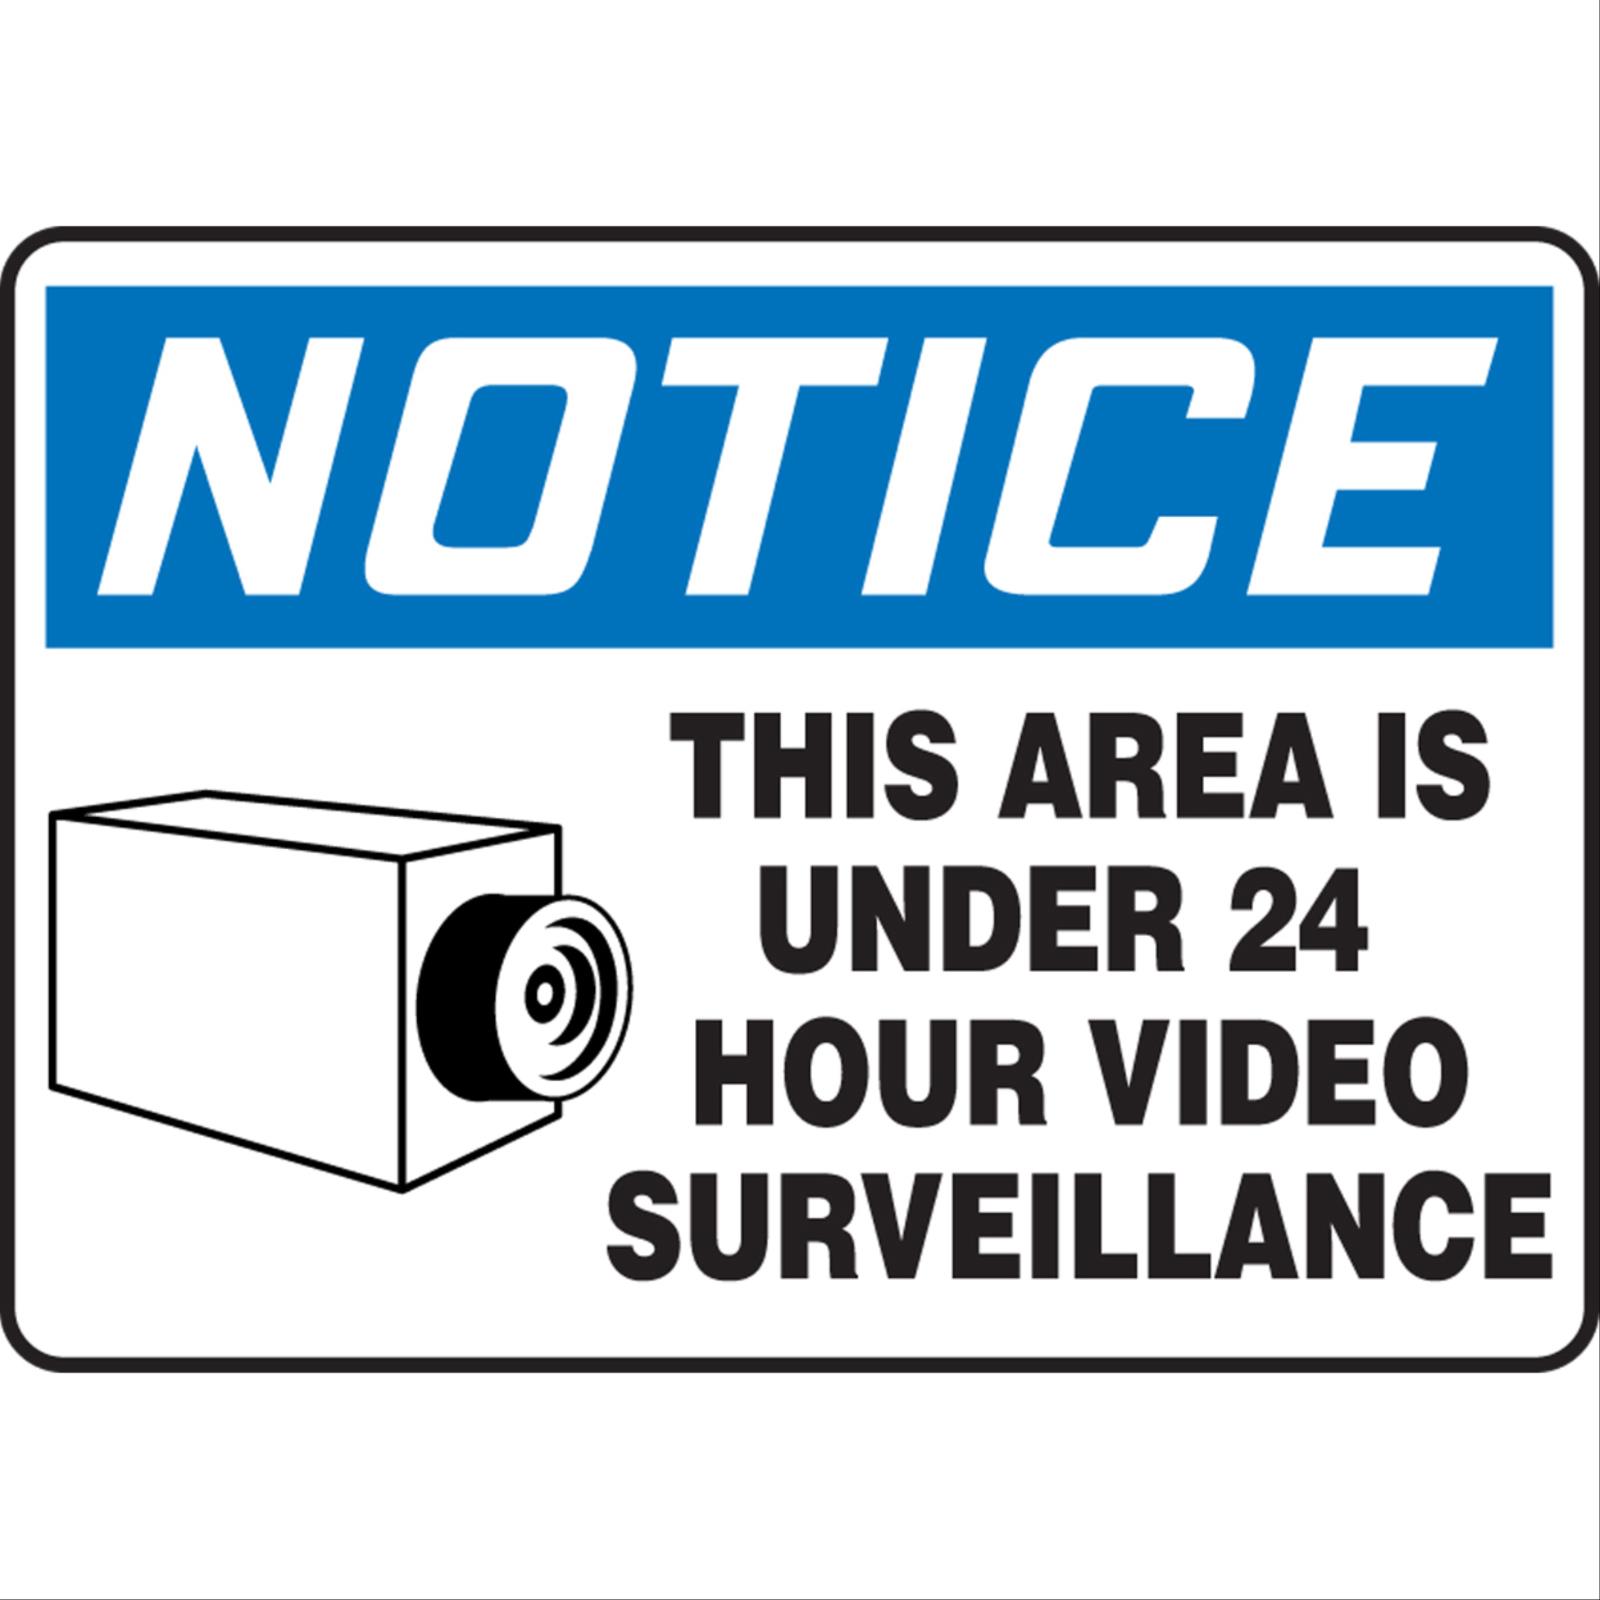 Notice This Area Is Under 24 Hour Video Surveillance Signs